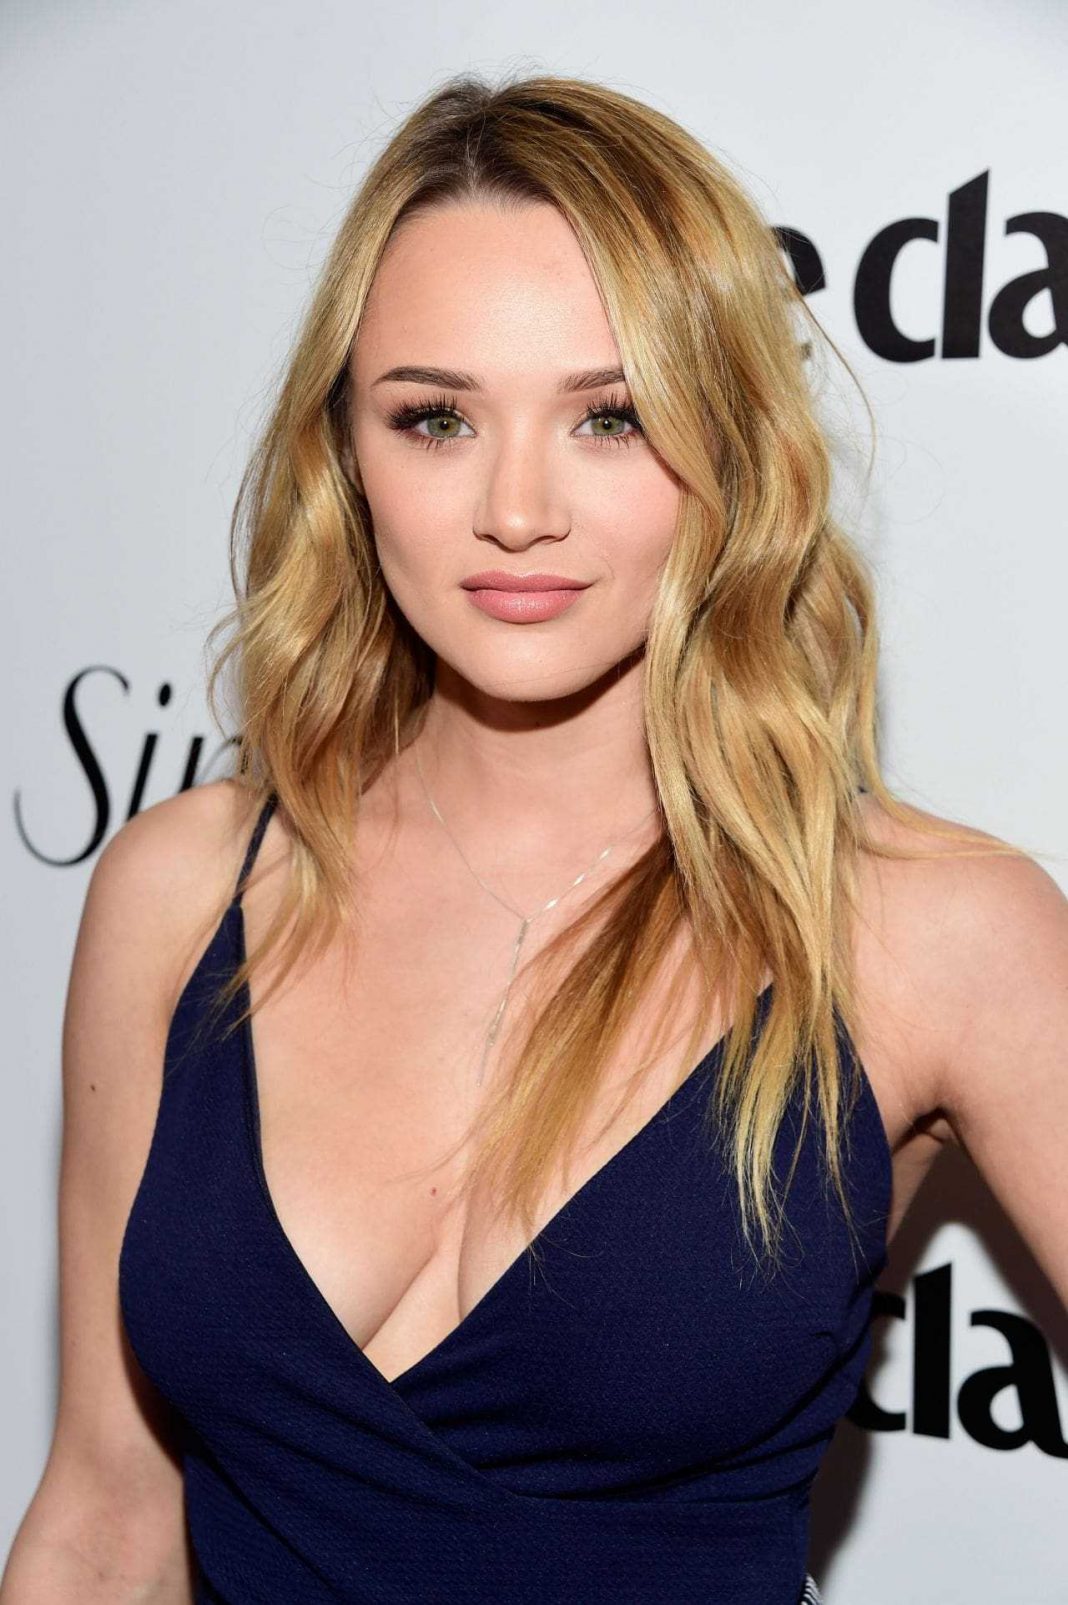 51 Hunter King Nude Pictures Display Her As A Skilled Performer 61